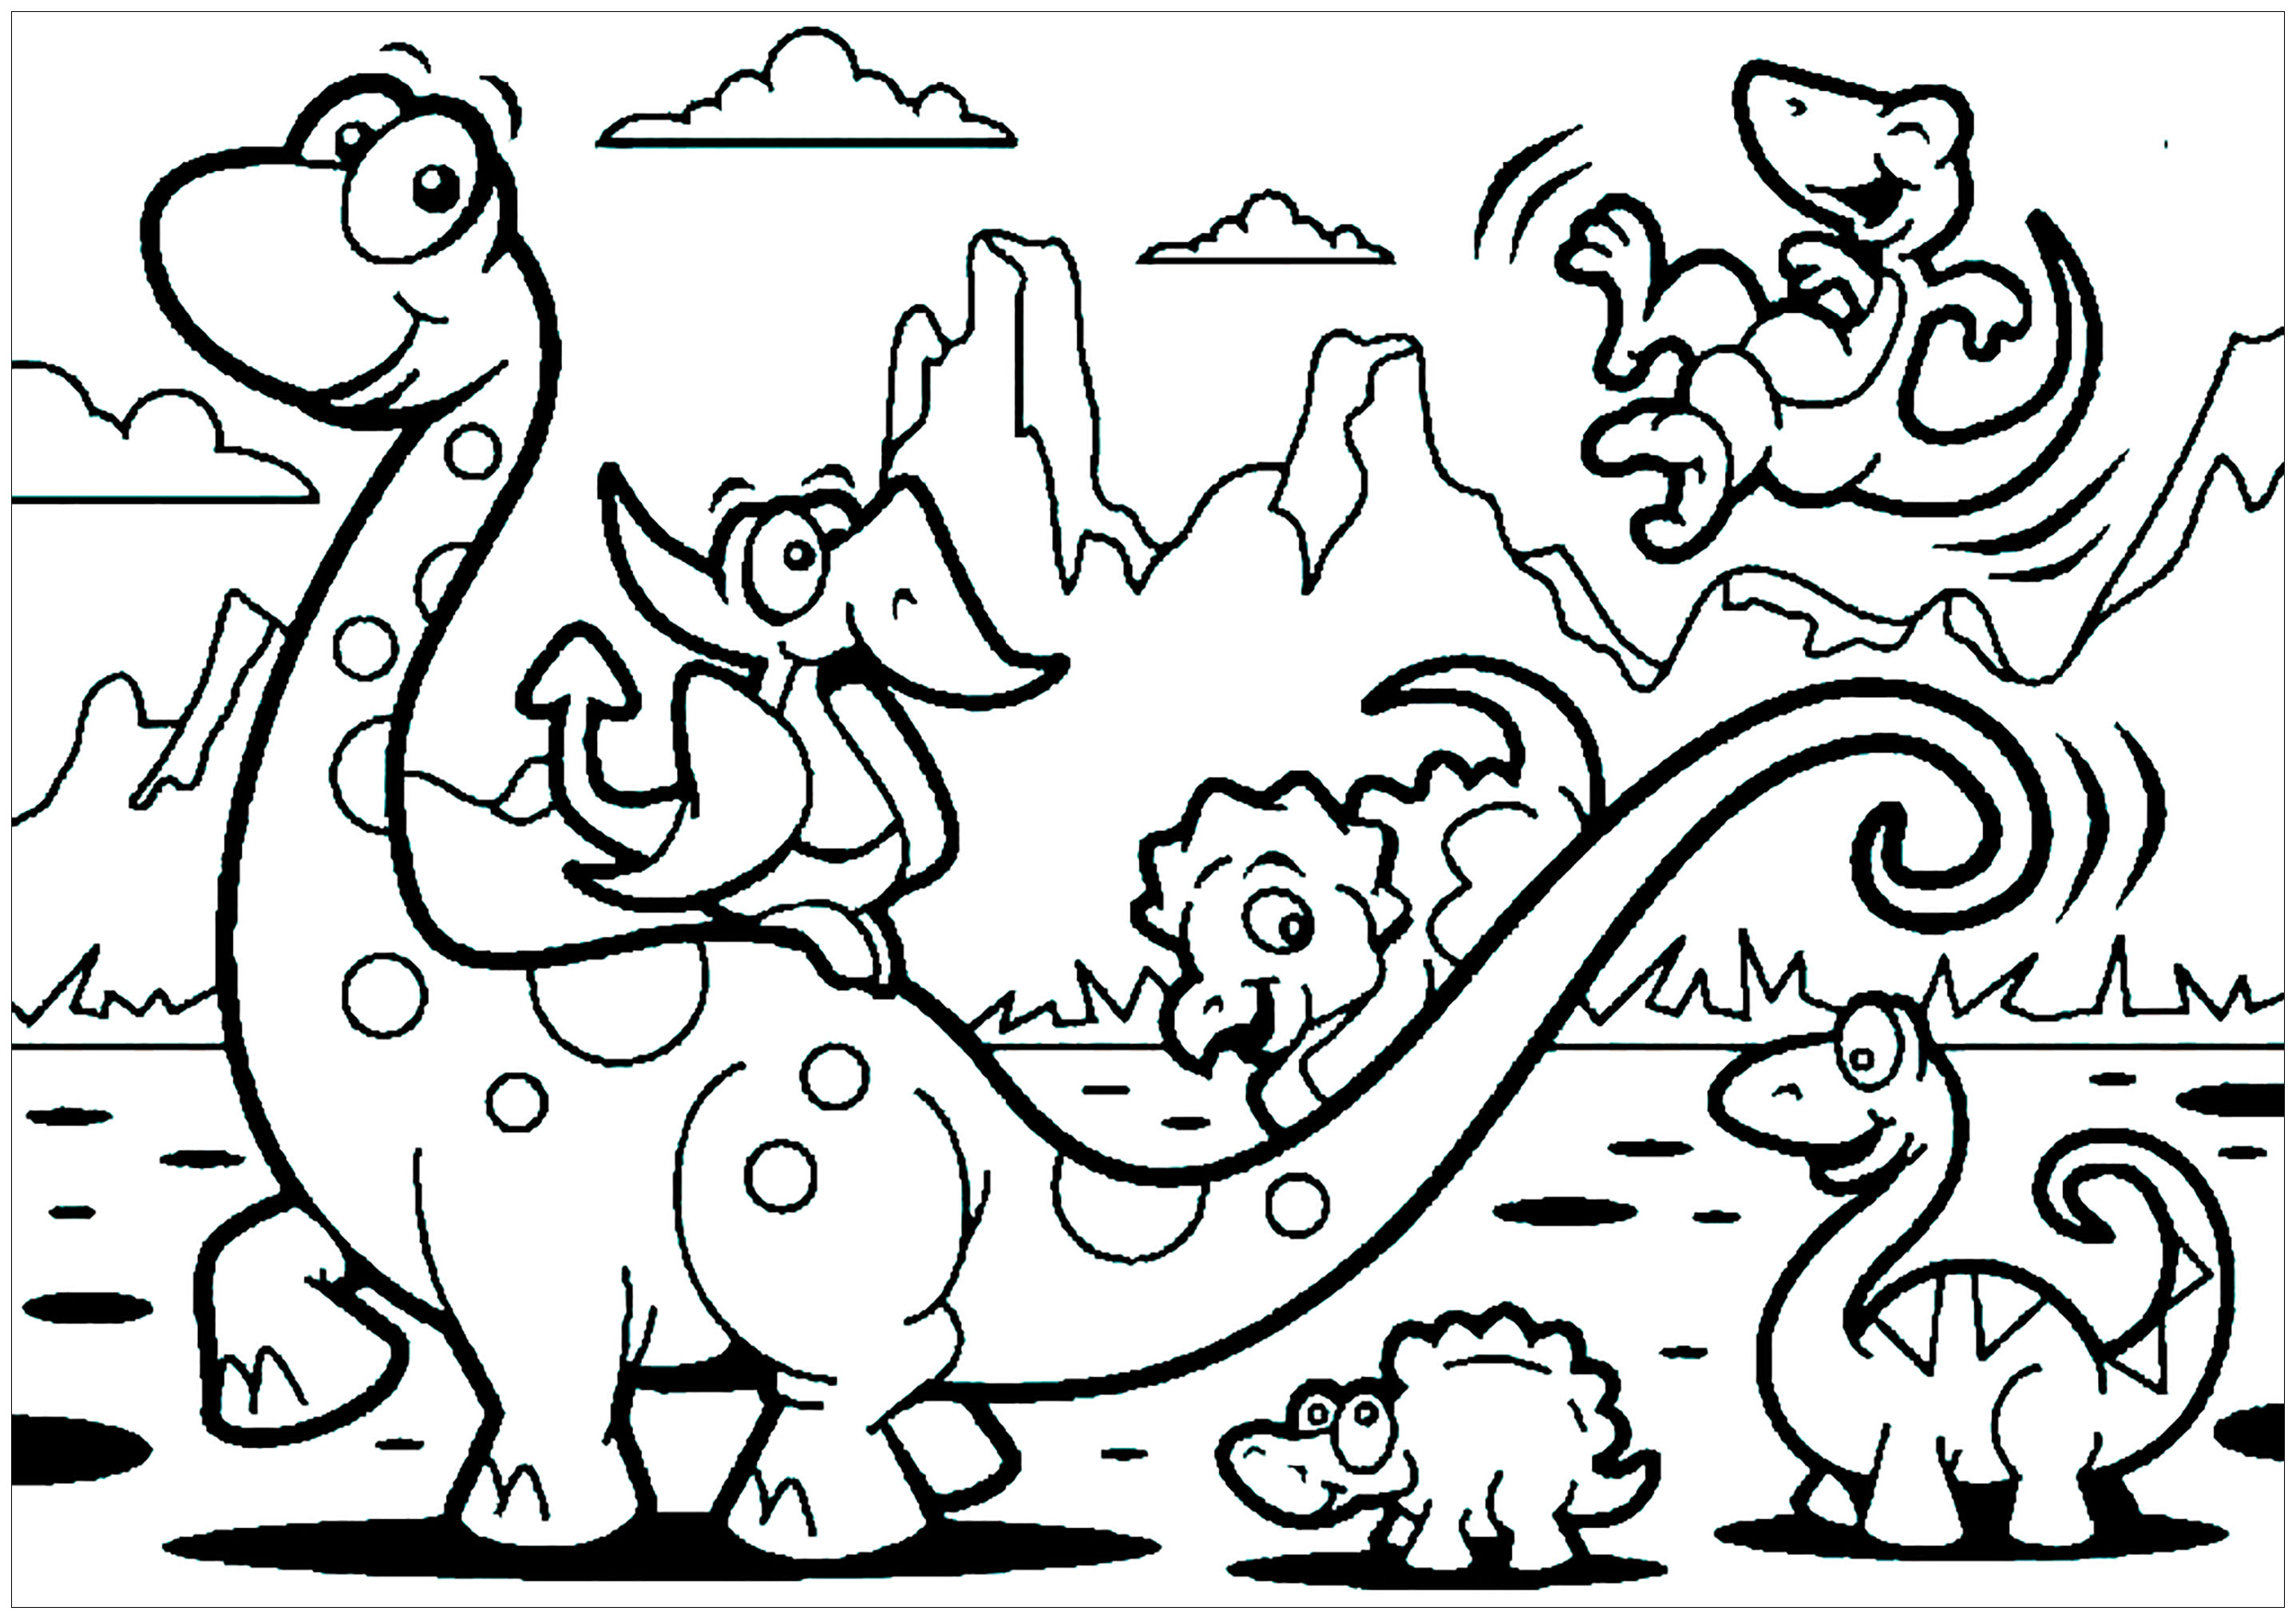 Dinosaur Pictures For Kids To Color / These free printable dinosaur